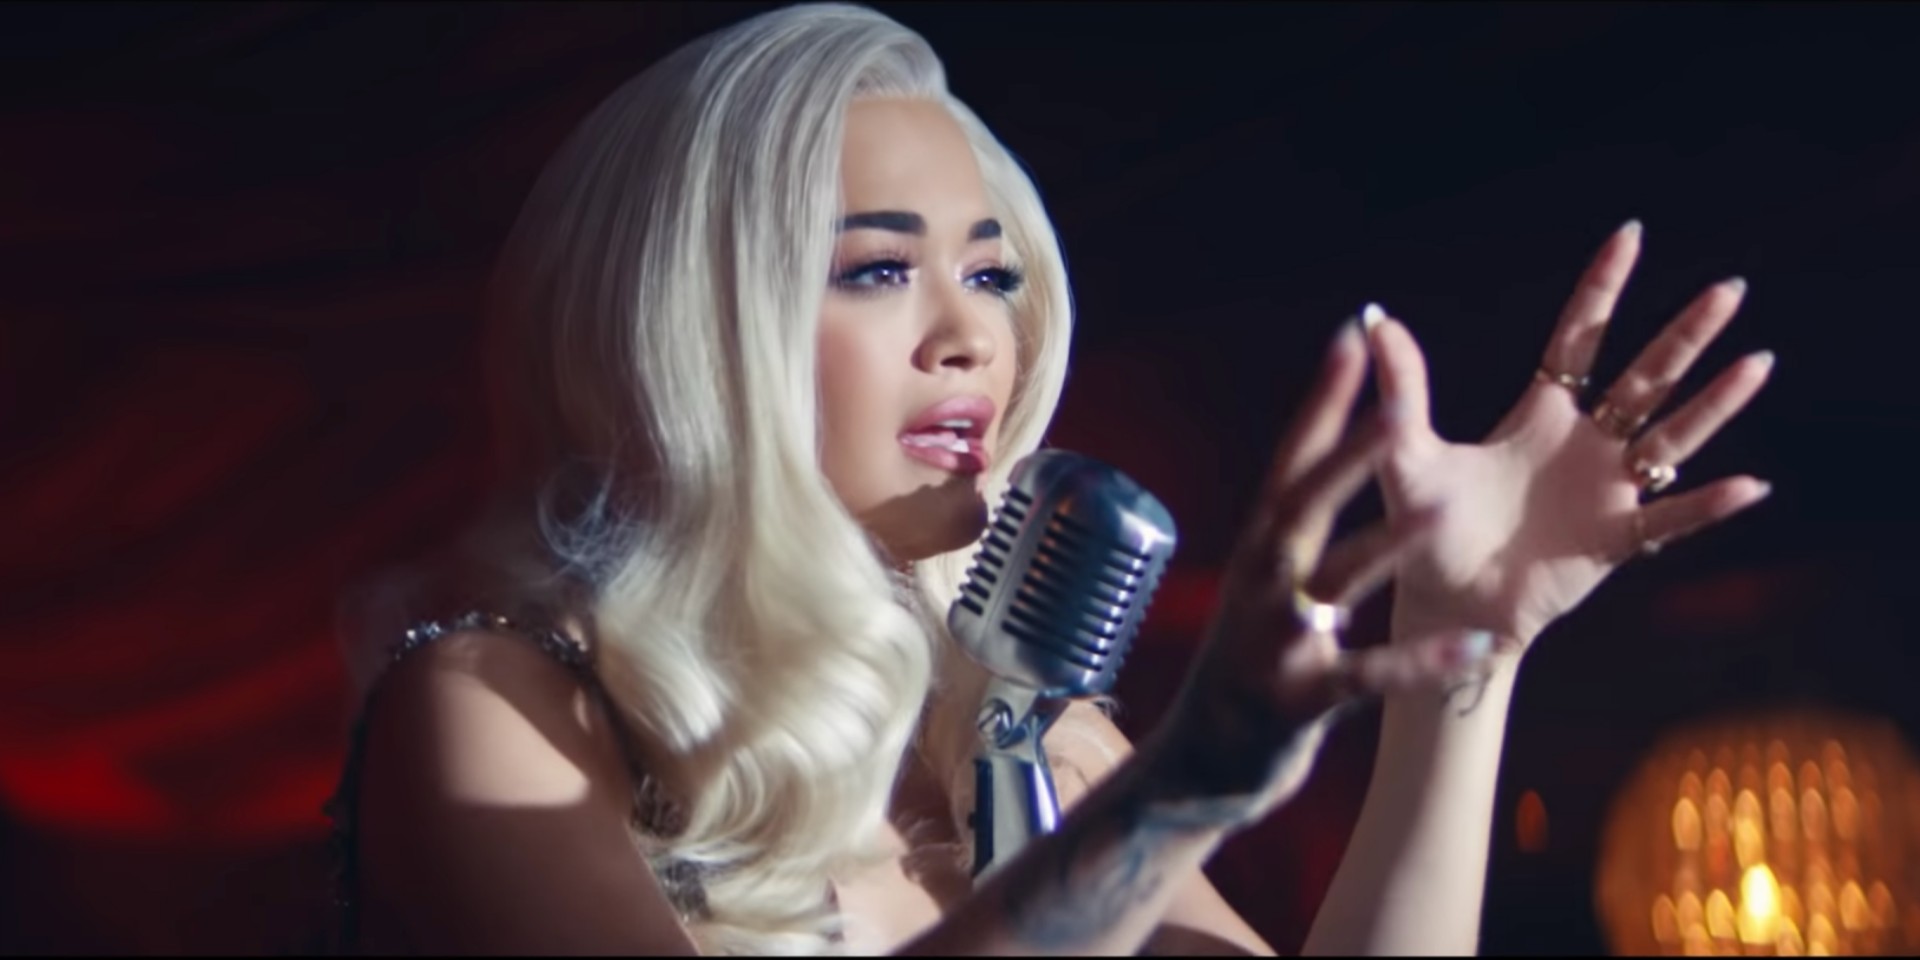 Rita Ora flaunts her chops in new music video for 'Only Want You feat. 6LACK' – watch